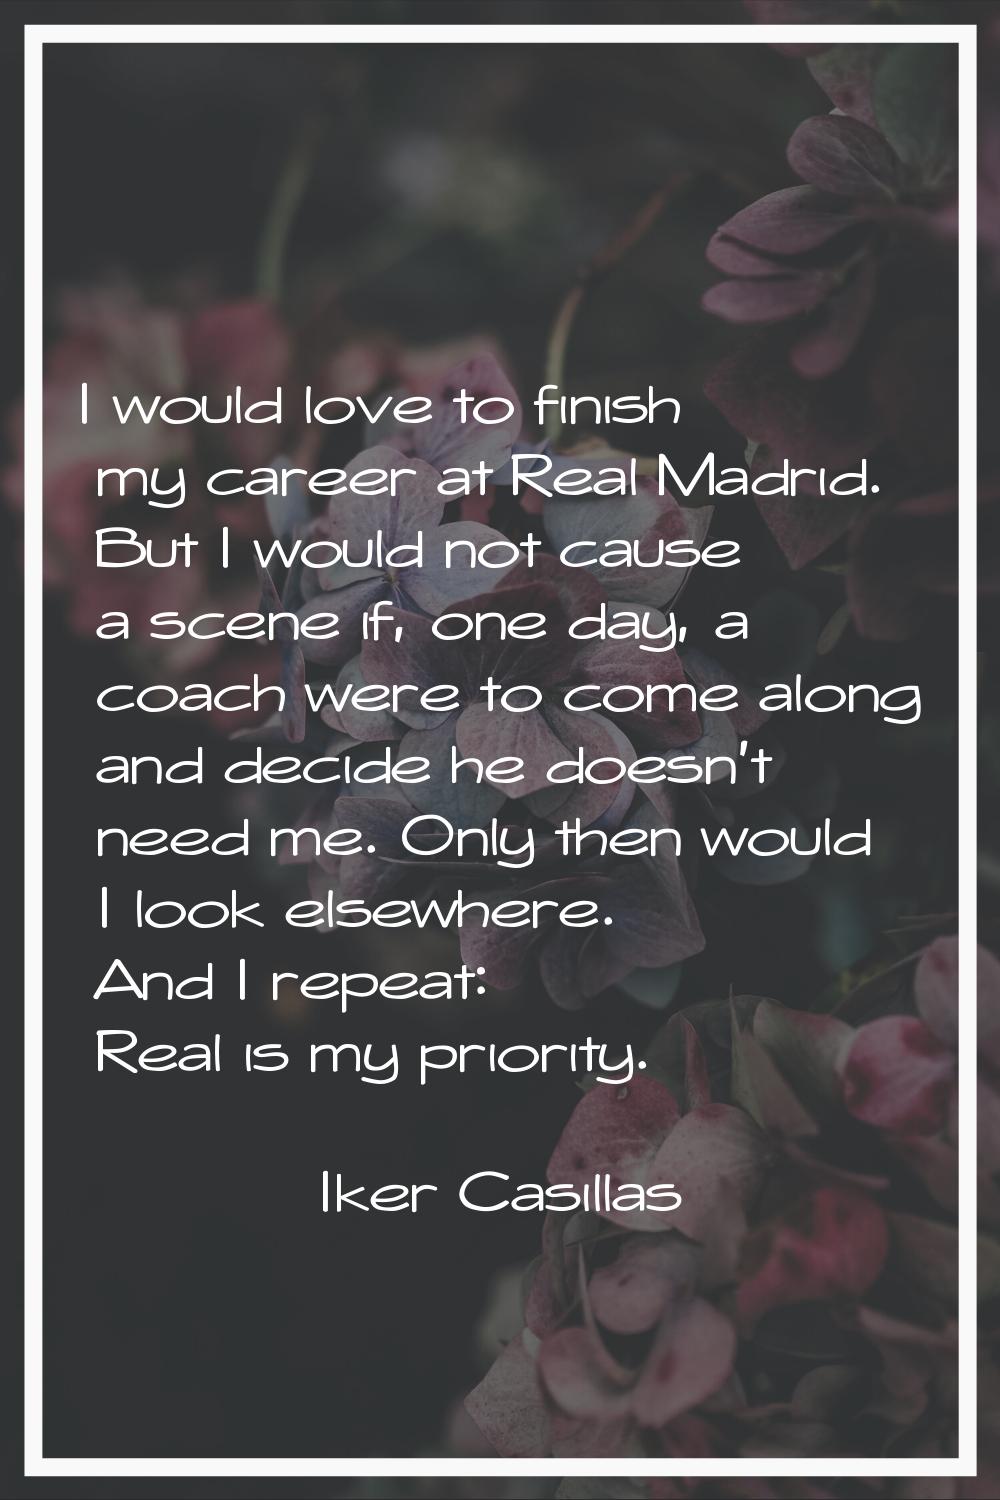 I would love to finish my career at Real Madrid. But I would not cause a scene if, one day, a coach